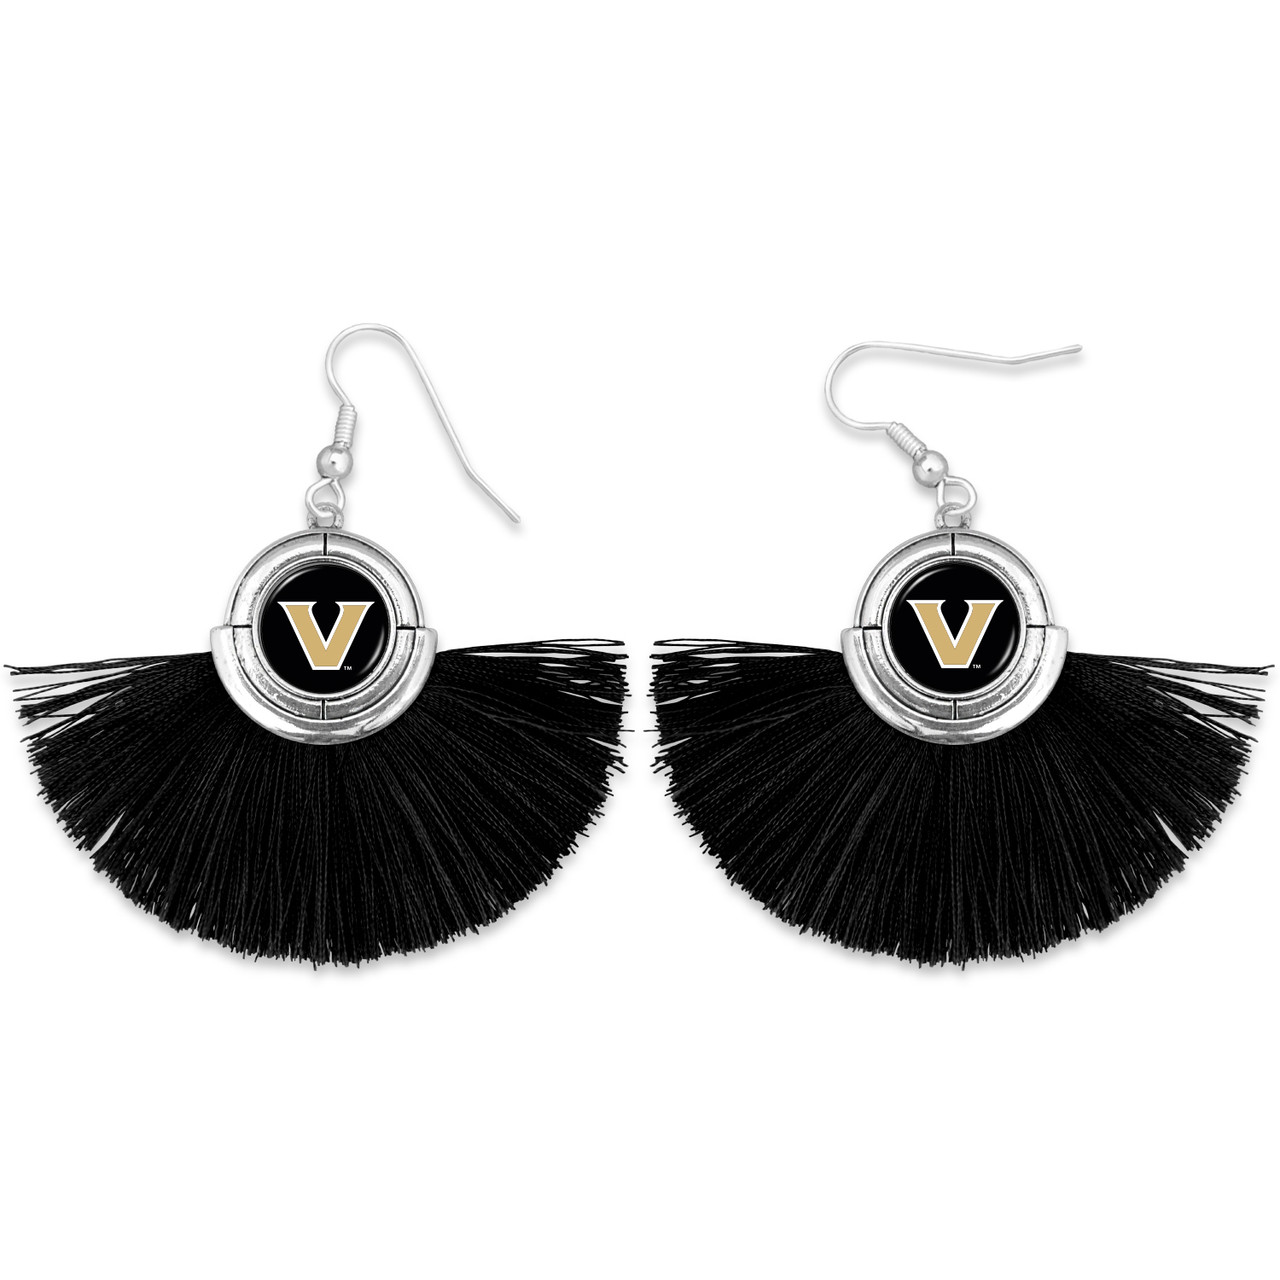 Vanderbilt Commodores Earrings- No Strings Attached